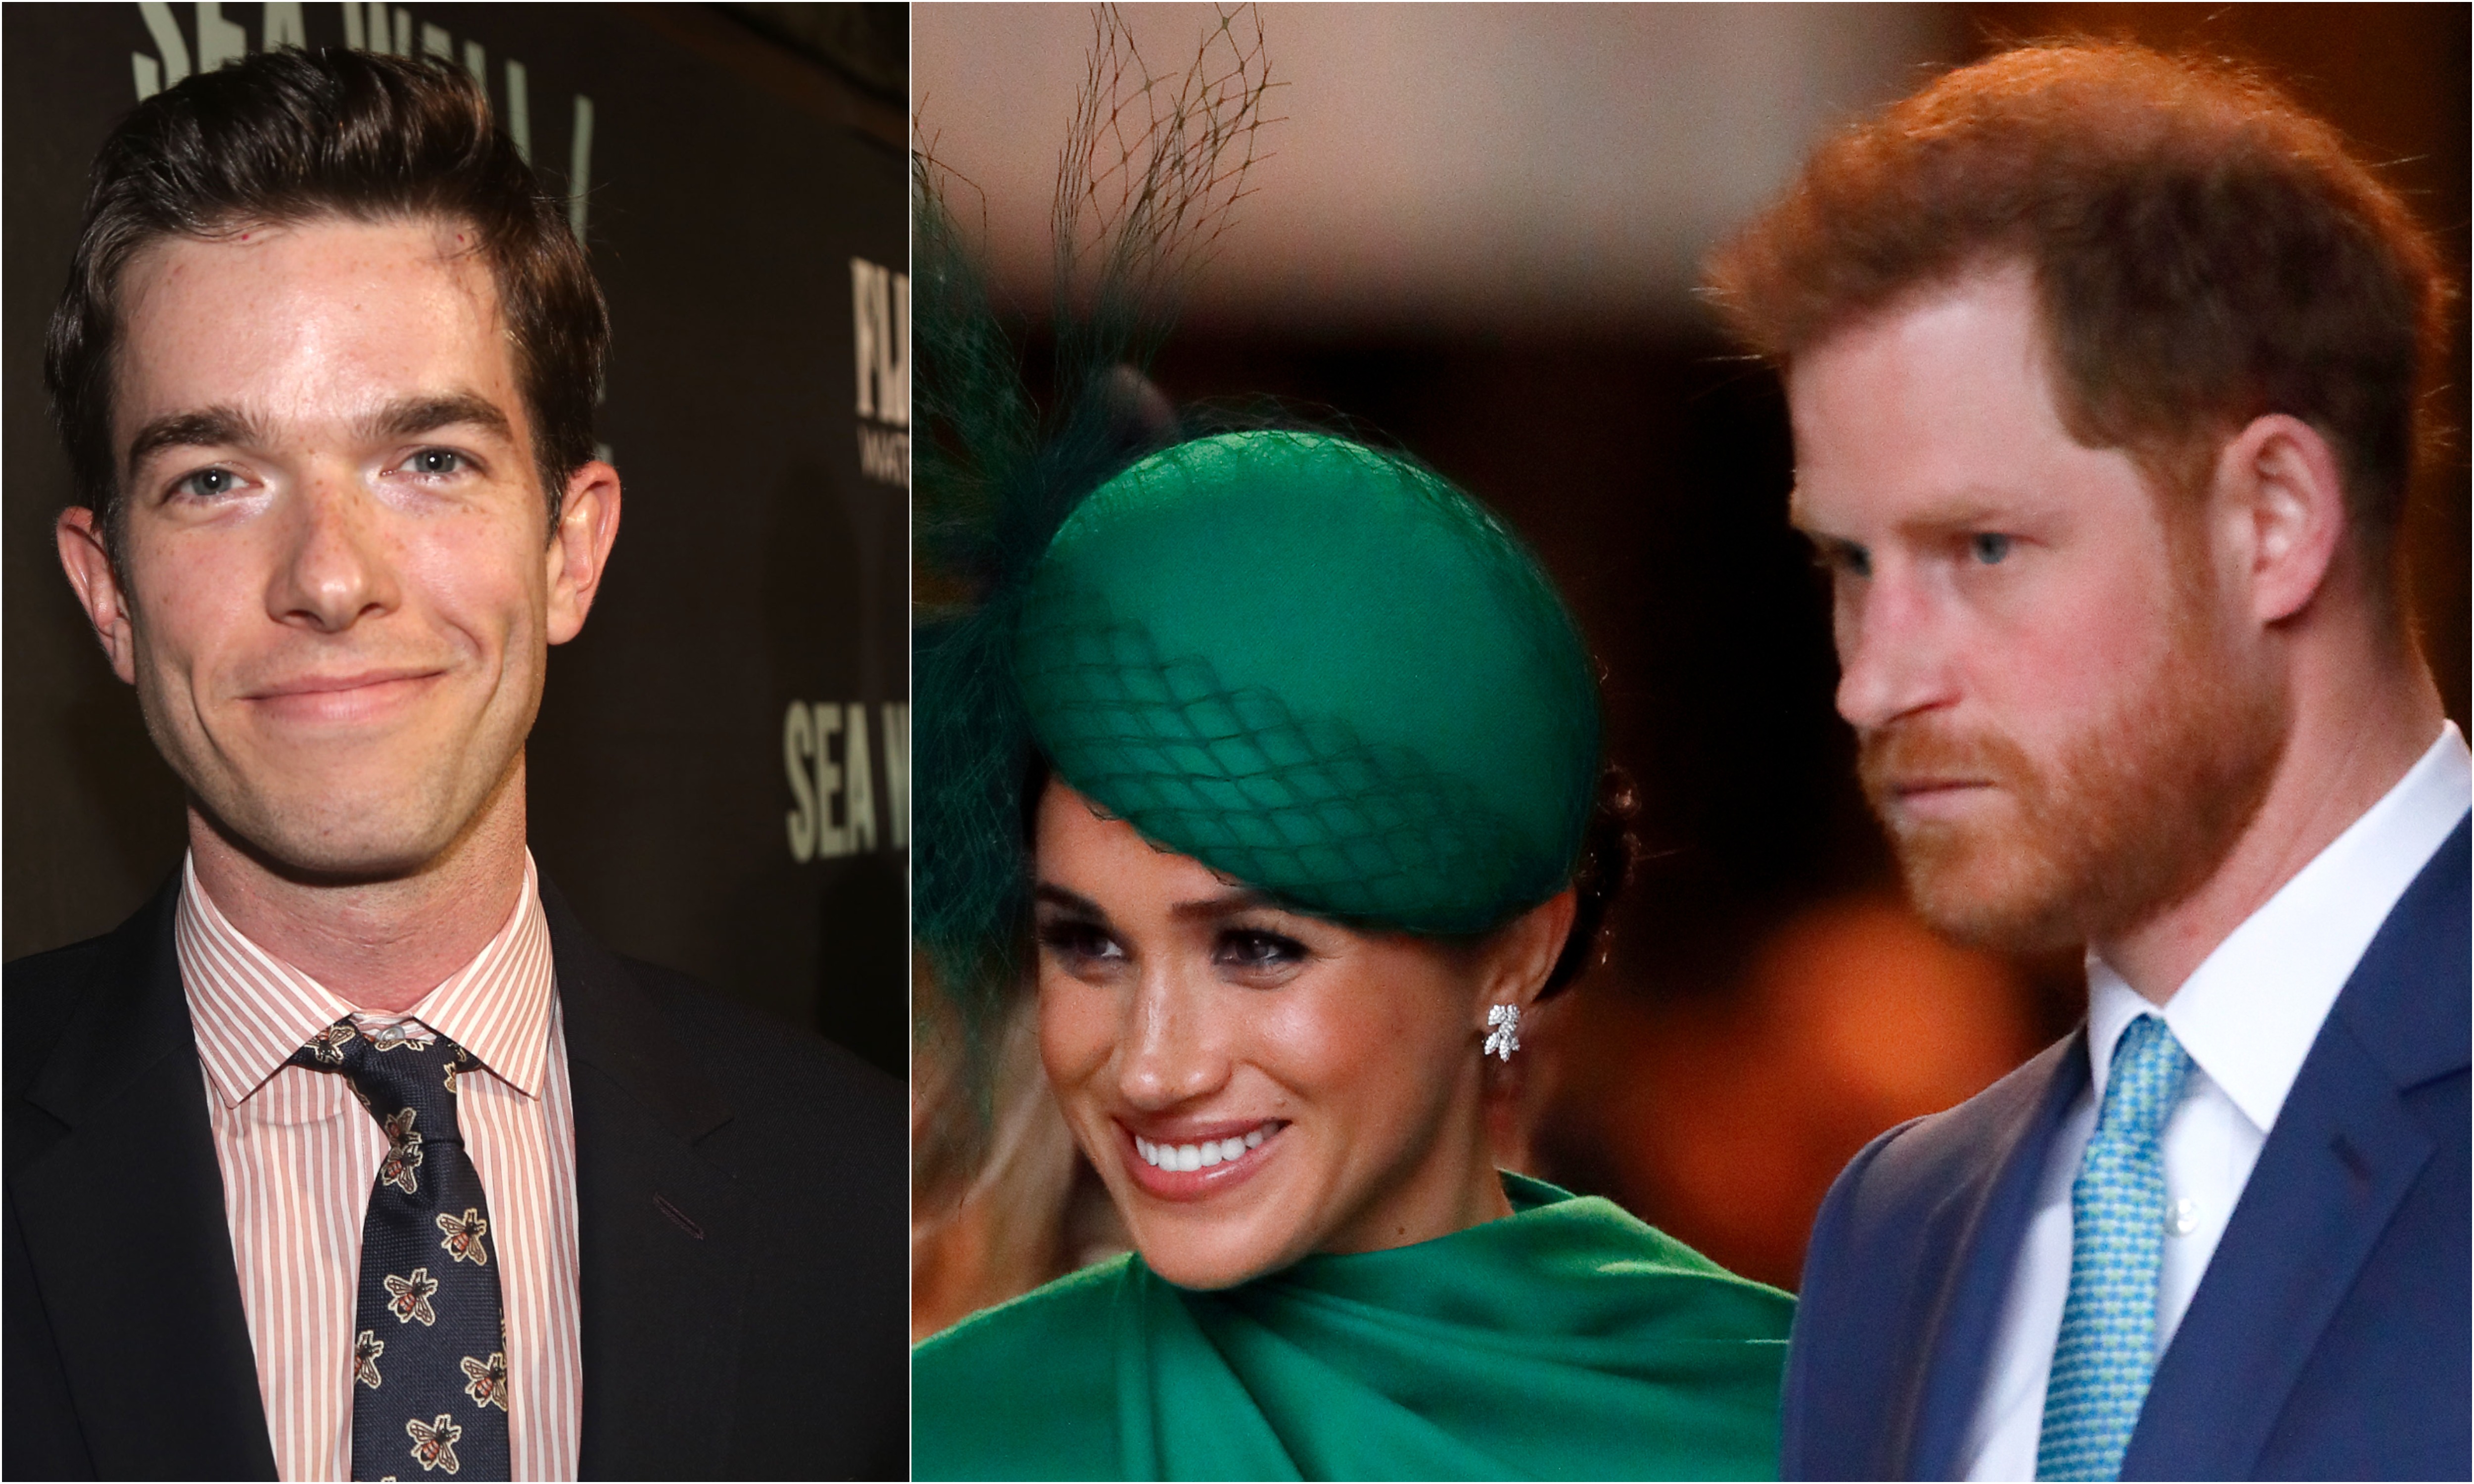 A joined photo of John Mulaney, Meghan Markle, and Prince Harry